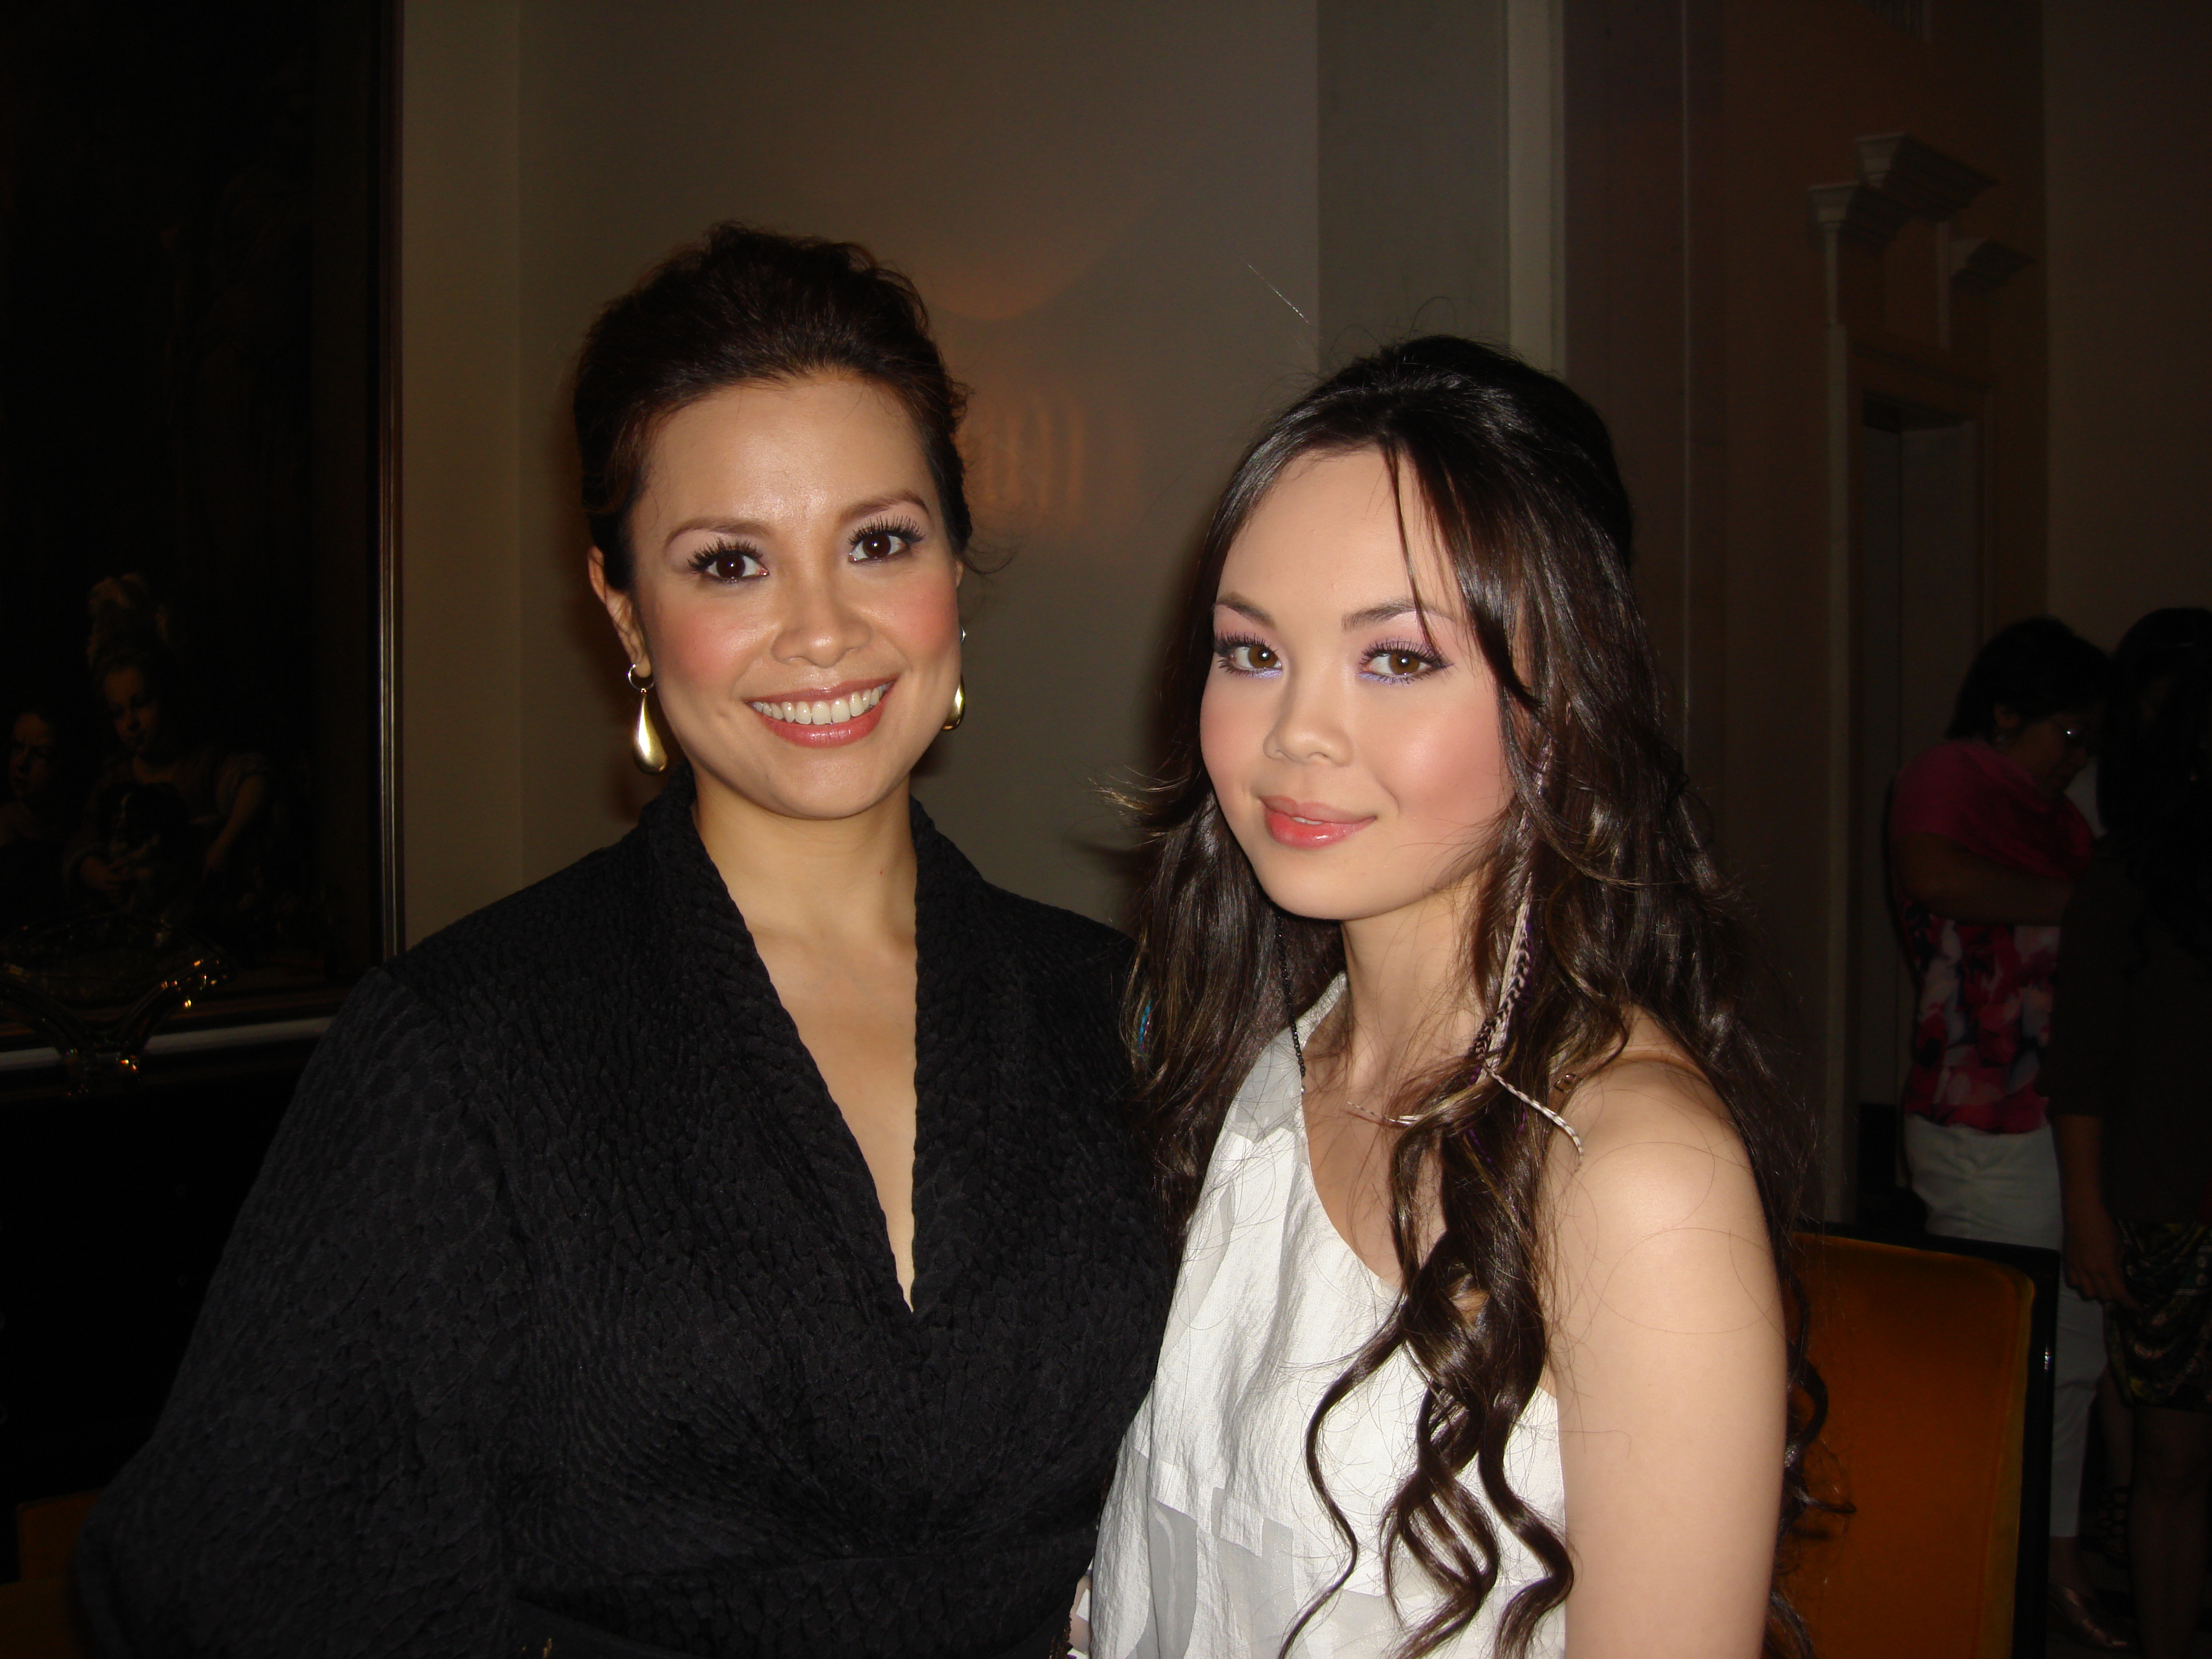 Anna Maria and Lea Salonga. Lea's show at The Carlyle Cafe, The Carlyle, New York City, 6-11